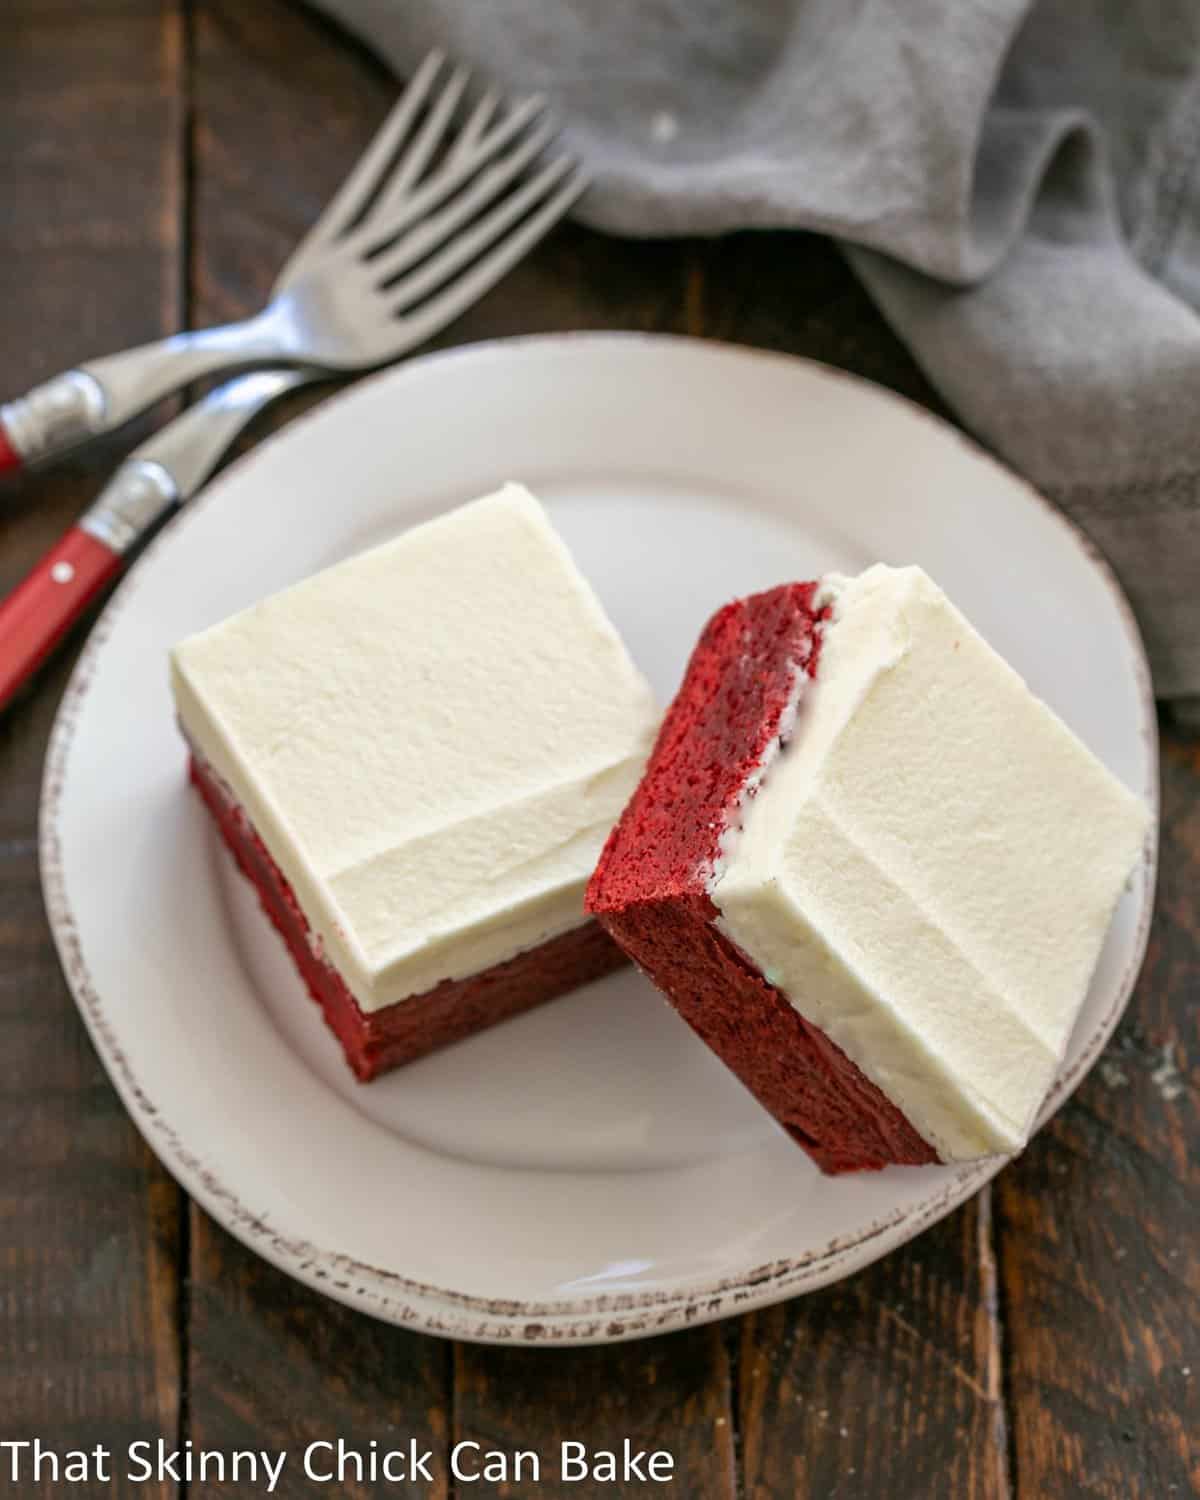 Overhead view of 2 red velvet brownies on a round white plate.